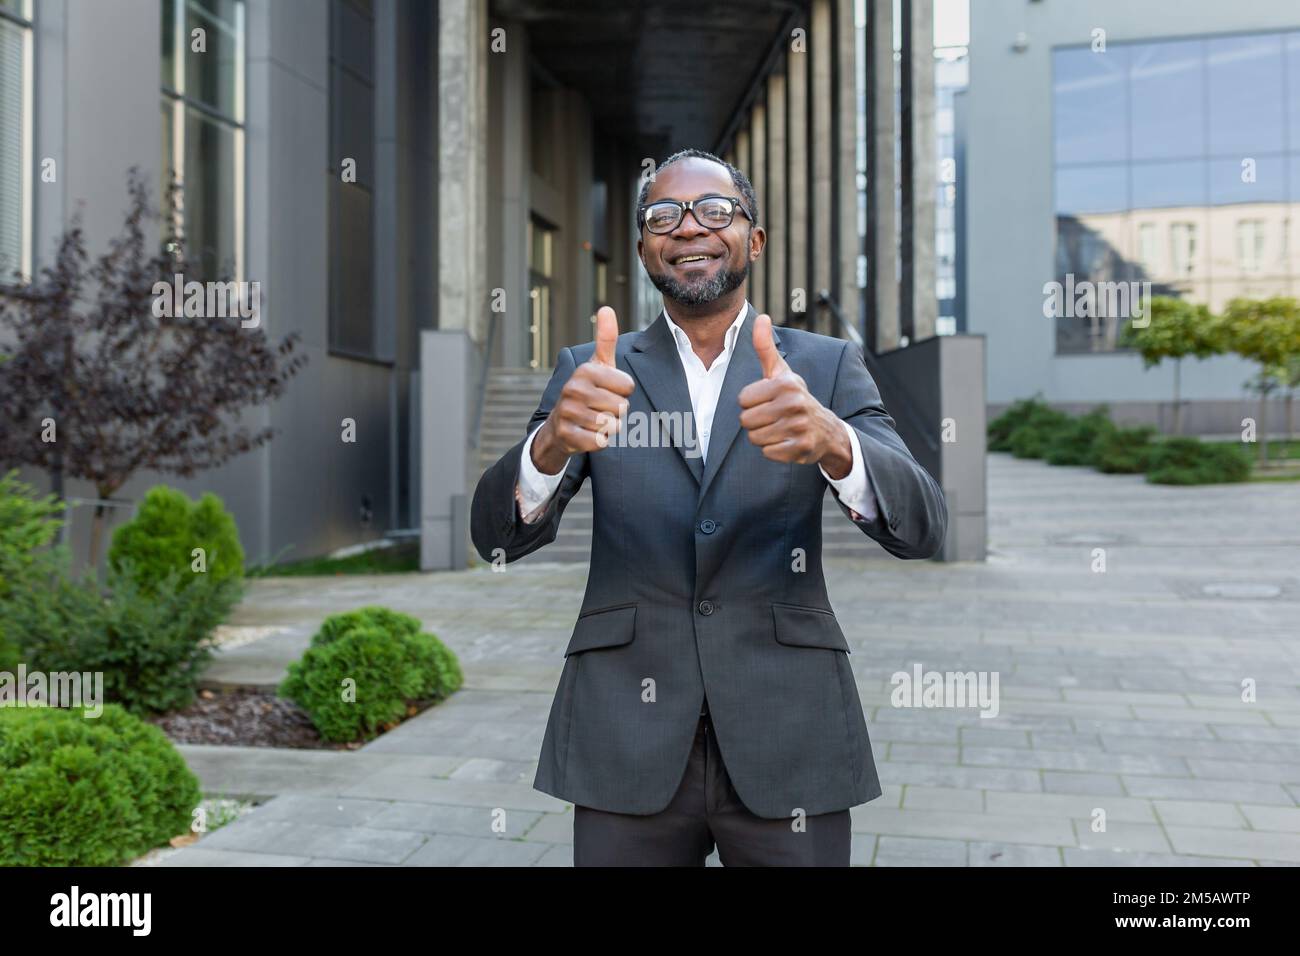 Portrait of successful African American mature businessman, senior man in business suit smiling and looking at camera showing happy thumbs up outside office building. Stock Photo